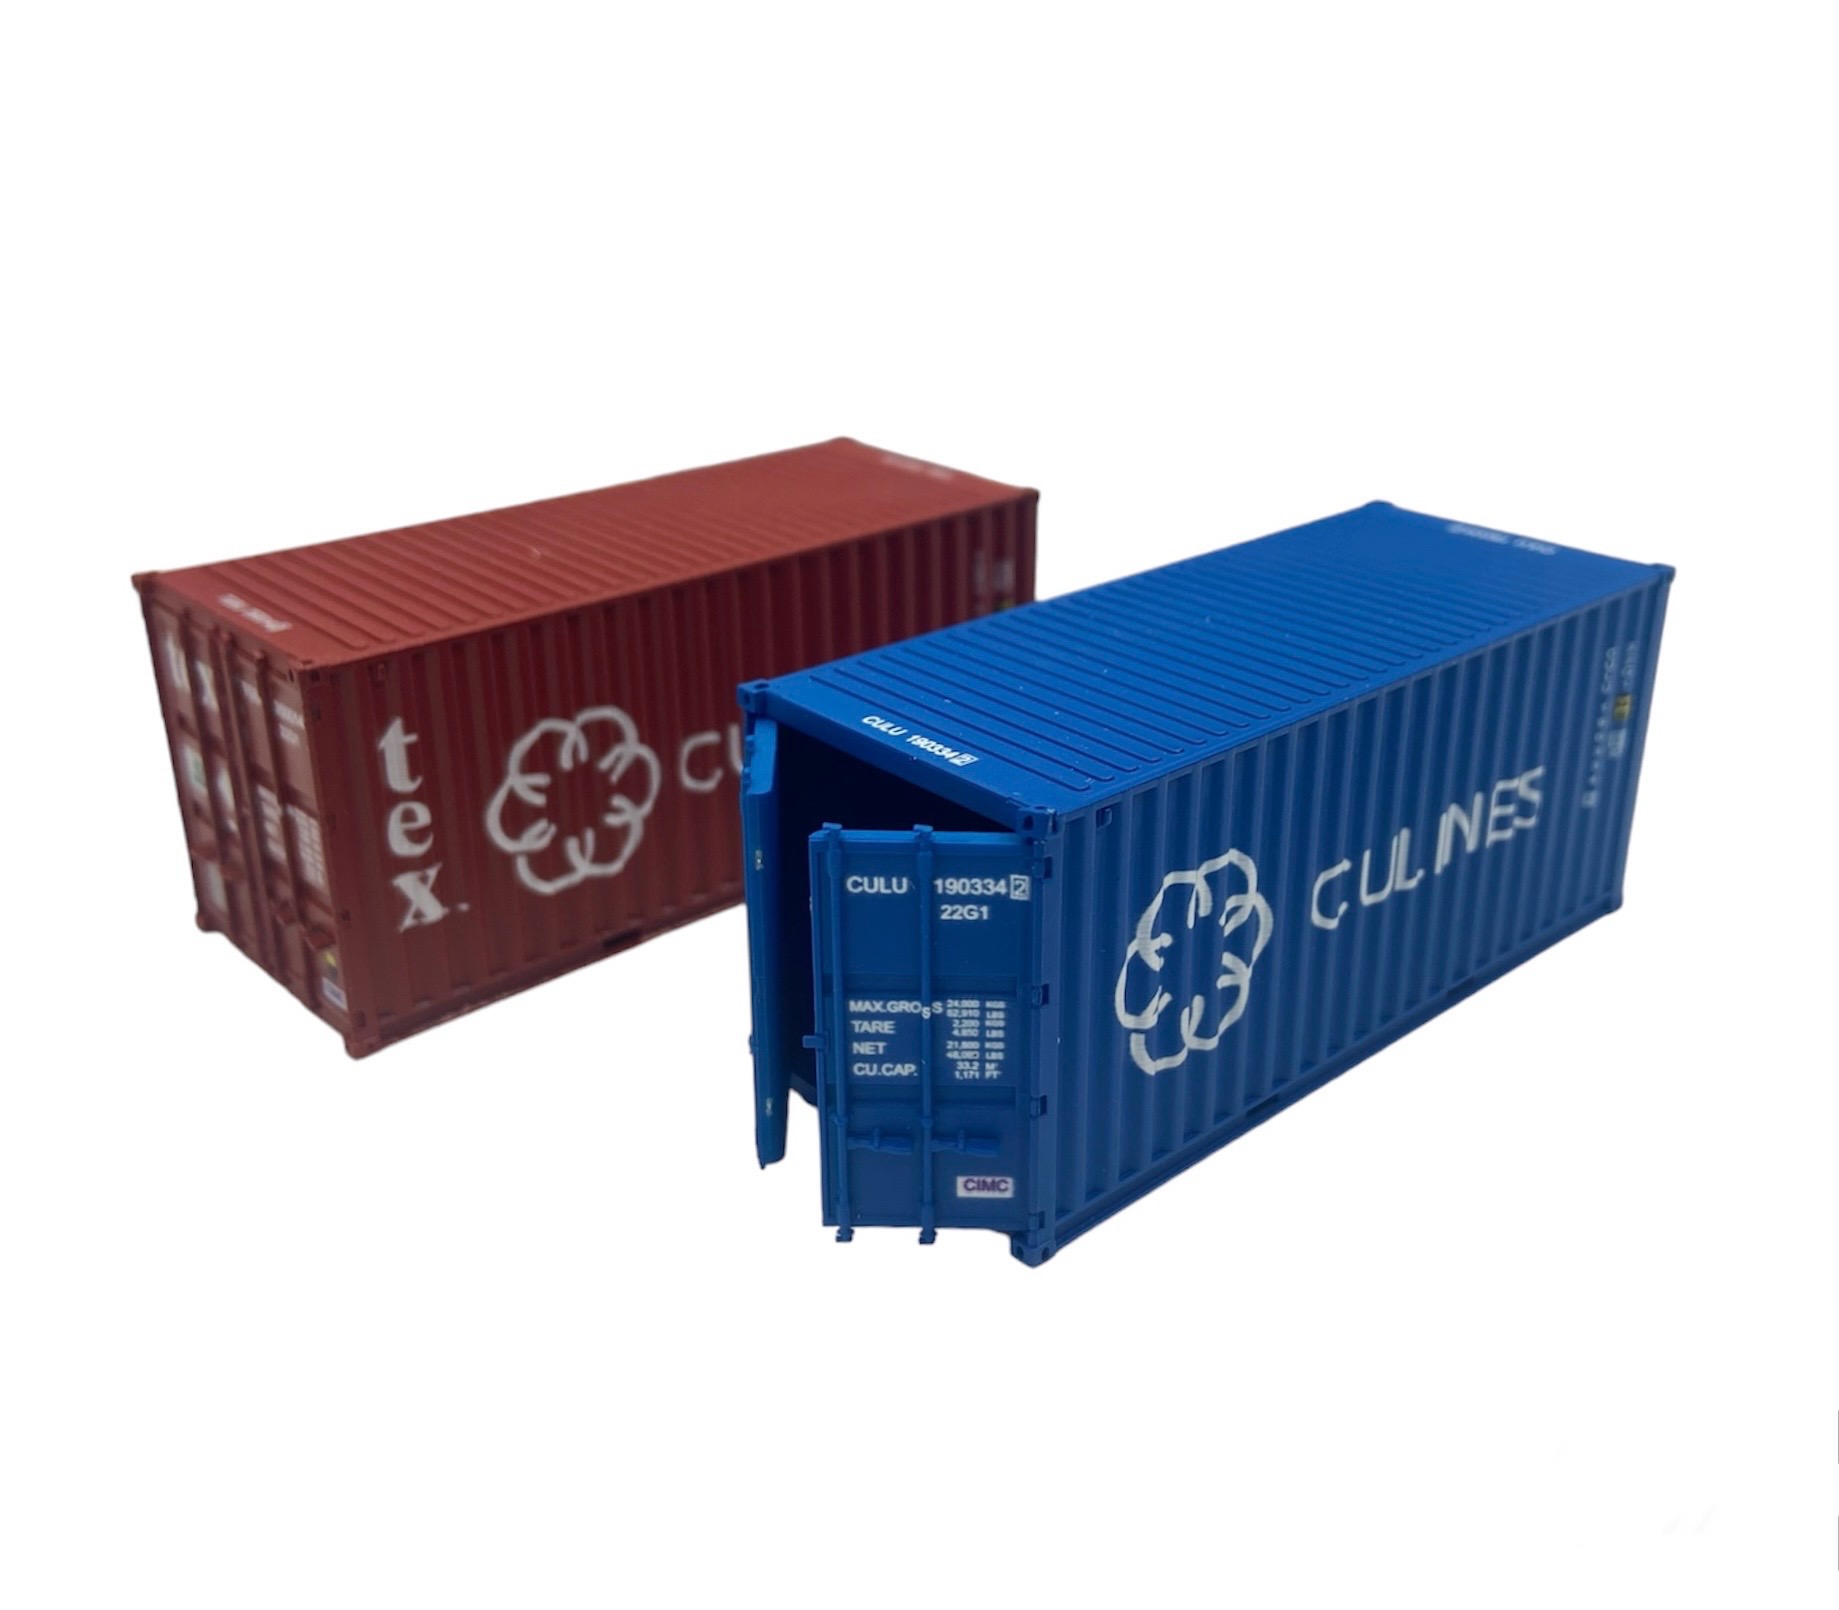 4F-028-172 20ft' Container  Culines 190334 2/ TBGU 350365 8 Twin Pack